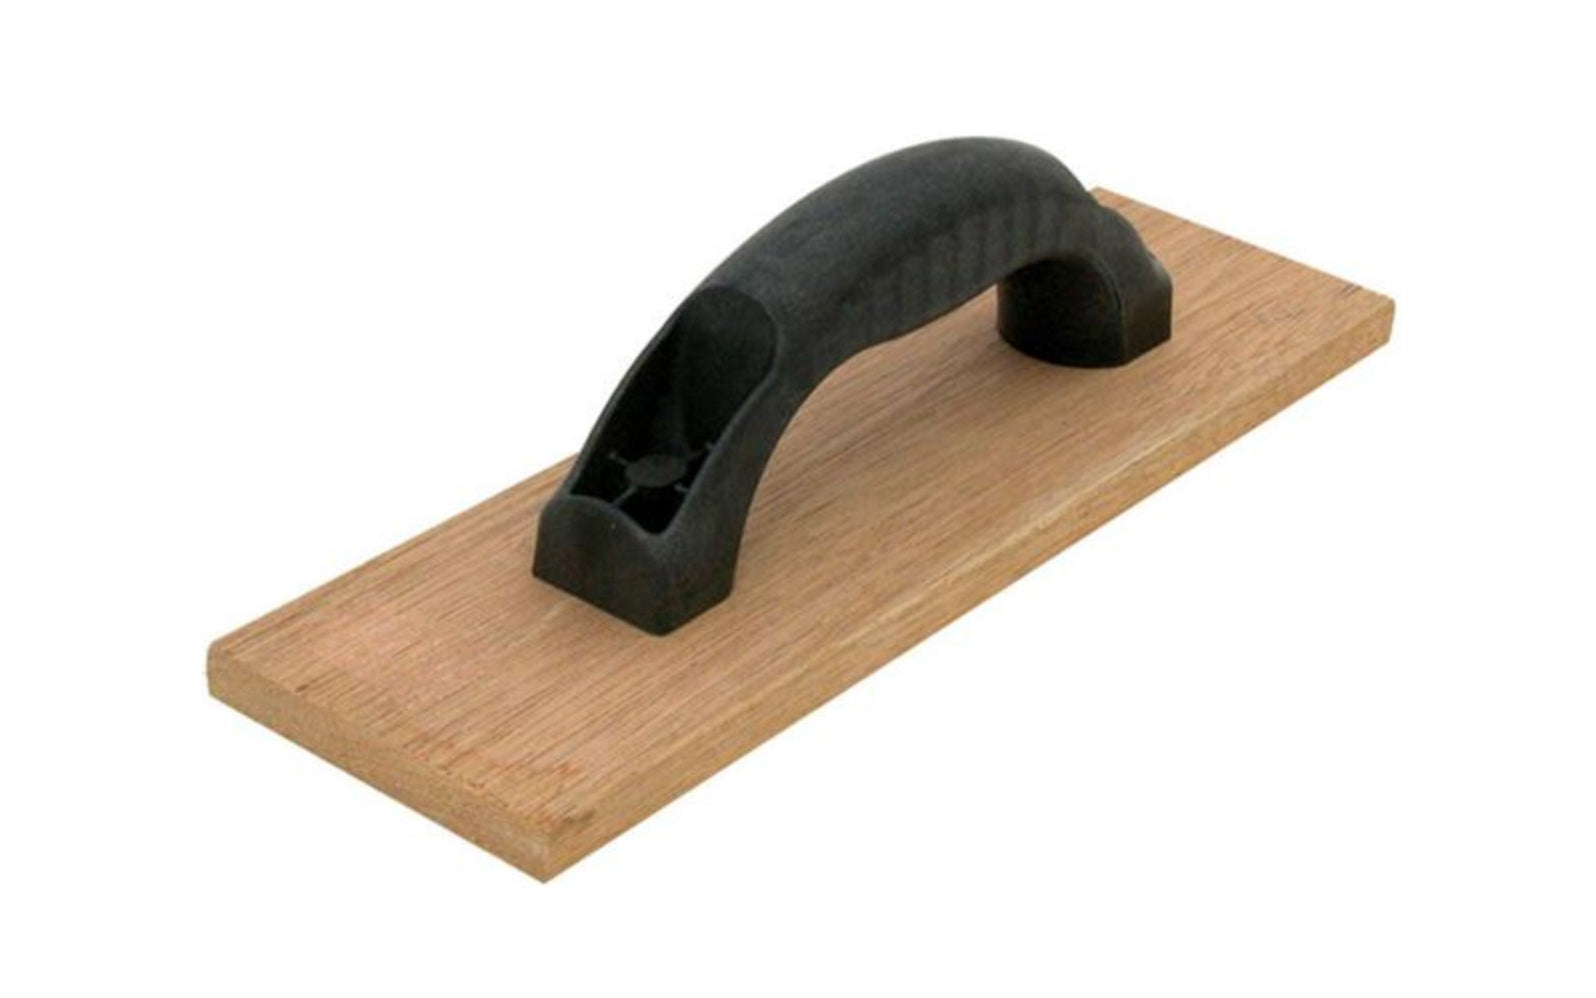 Marshalltown 14" x 3-1/2" QLT Wood Hand Float. Contractor-grade QLT Wood Hand Float made from a 1/2" thick seasoned mahogany. The wood hand floats are ideal for slightly rougher concrete finishes, steps, and working in color hardener. Marshalltown Model WF944 ~ Made in USA ~ 035965045148